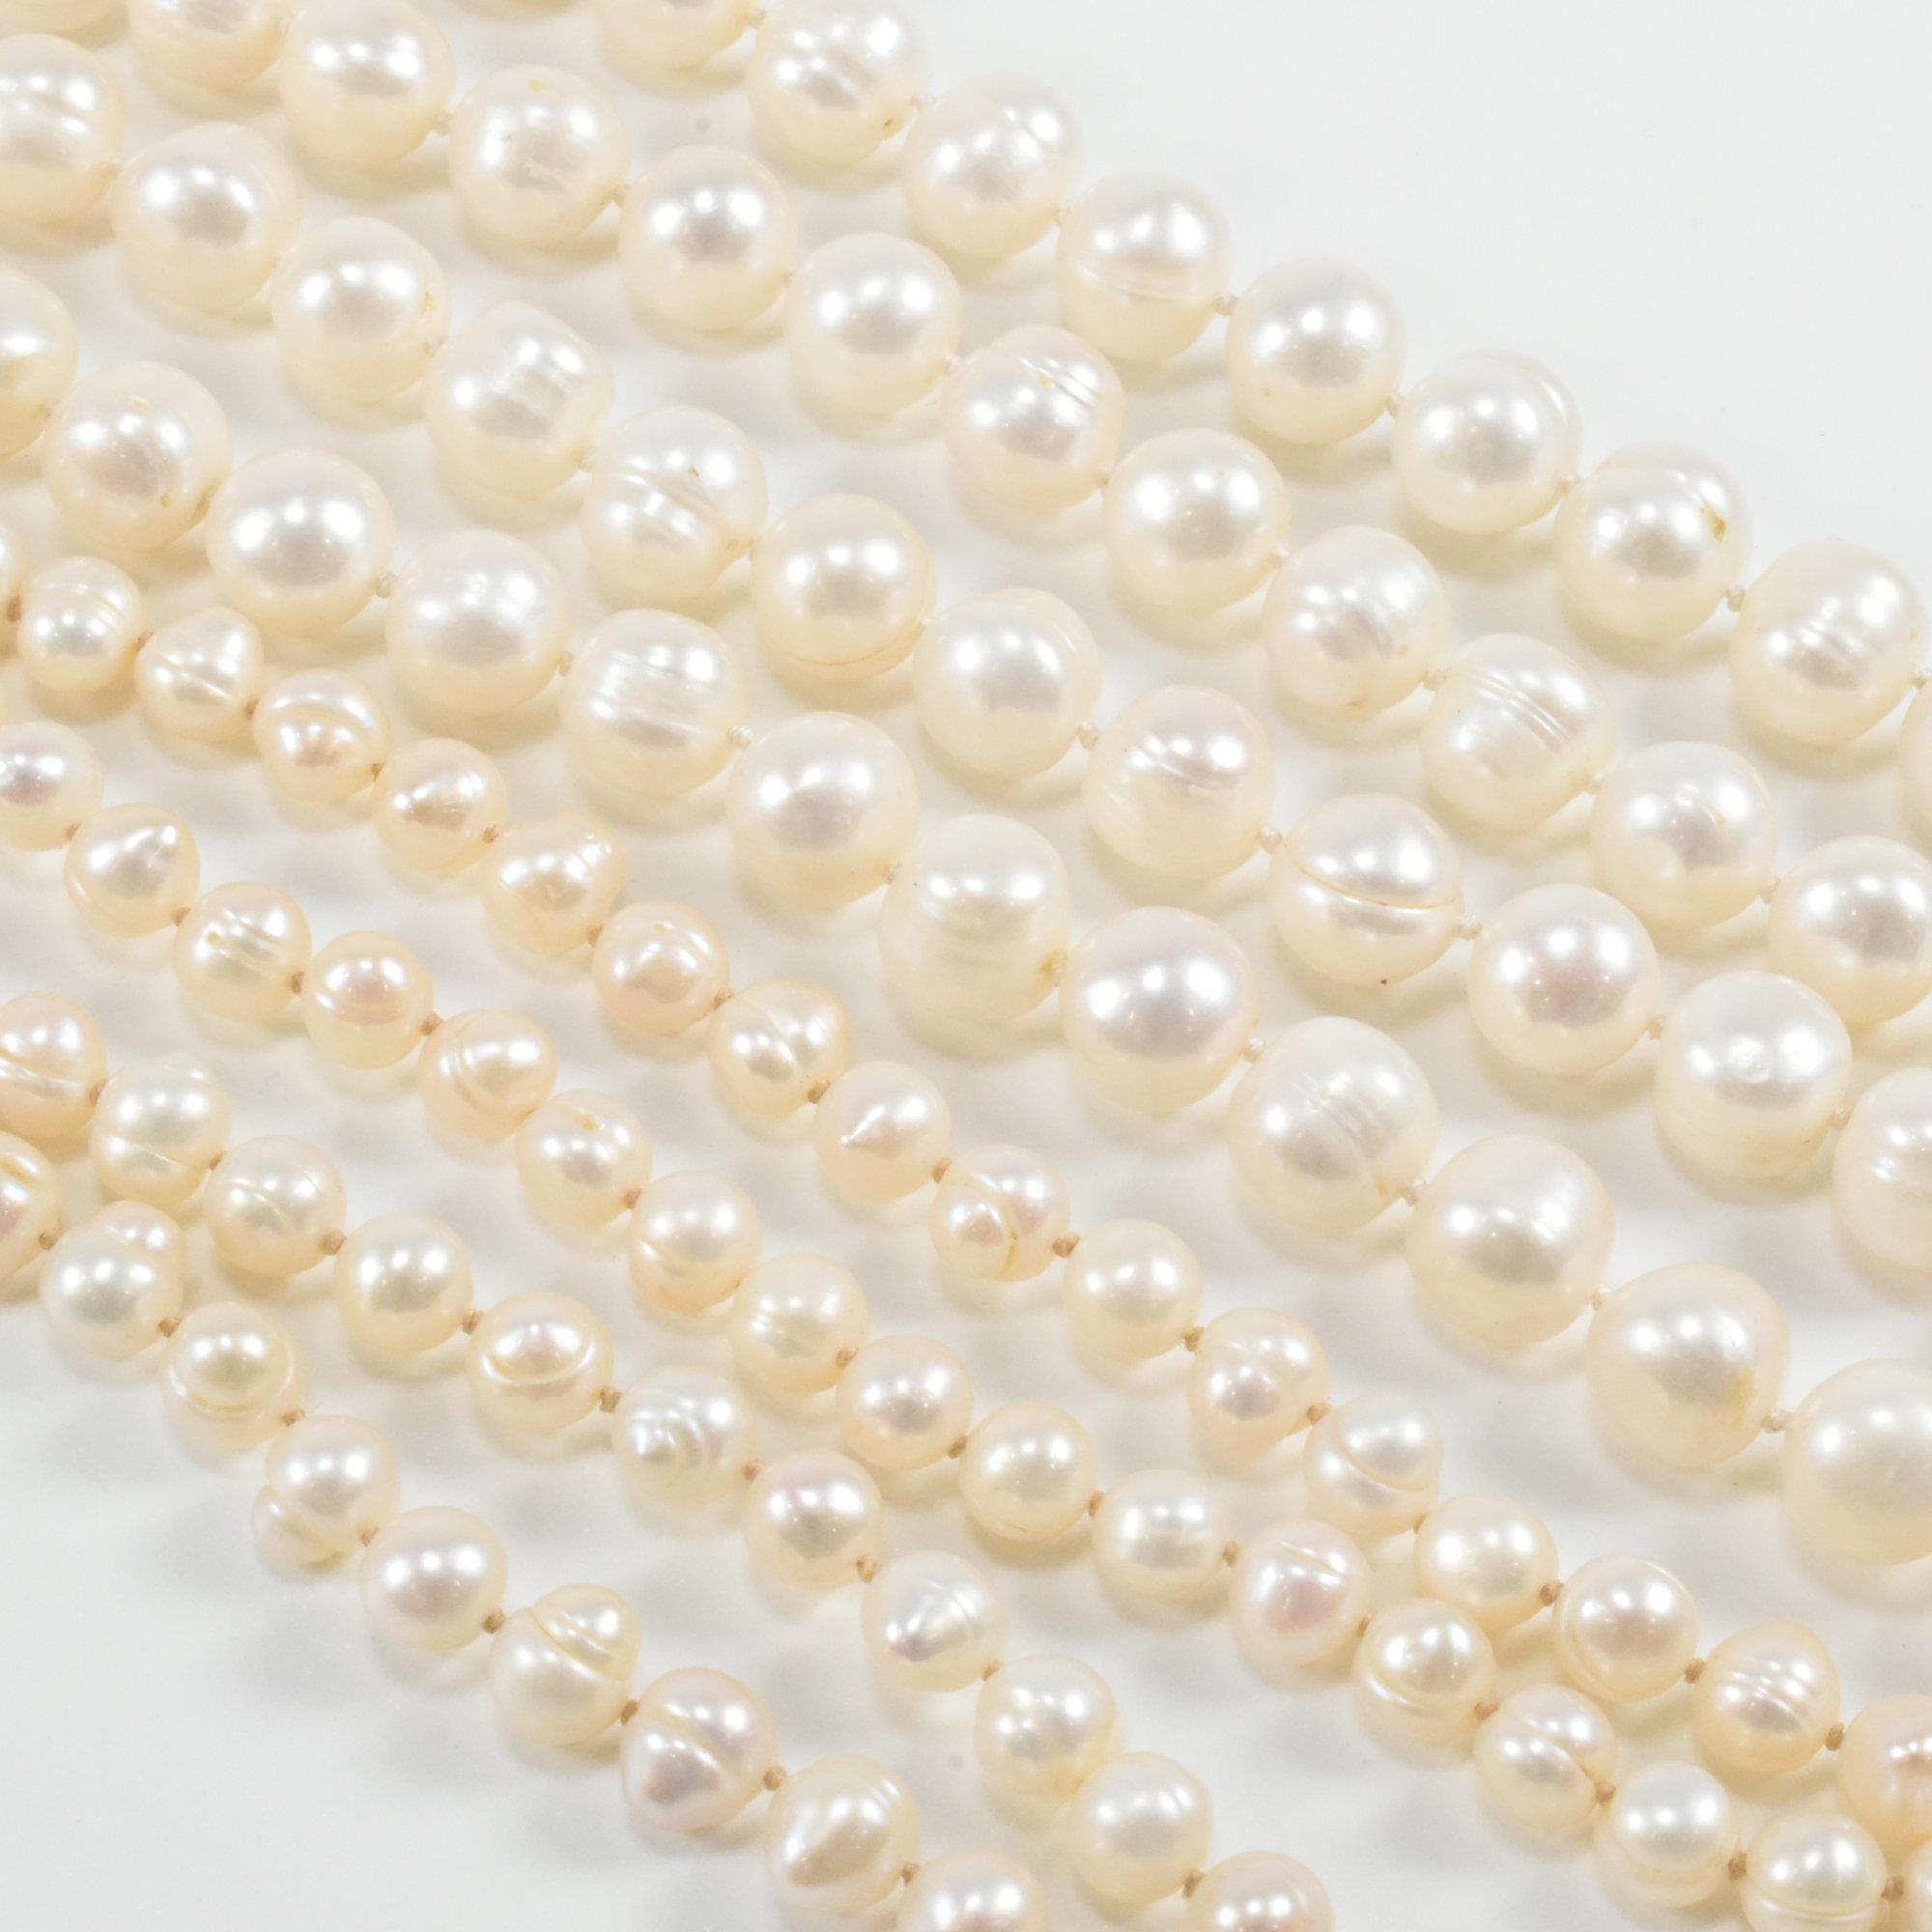 TWO STRINGS OF CULTURES BAROQUE PEARLS - Image 3 of 6